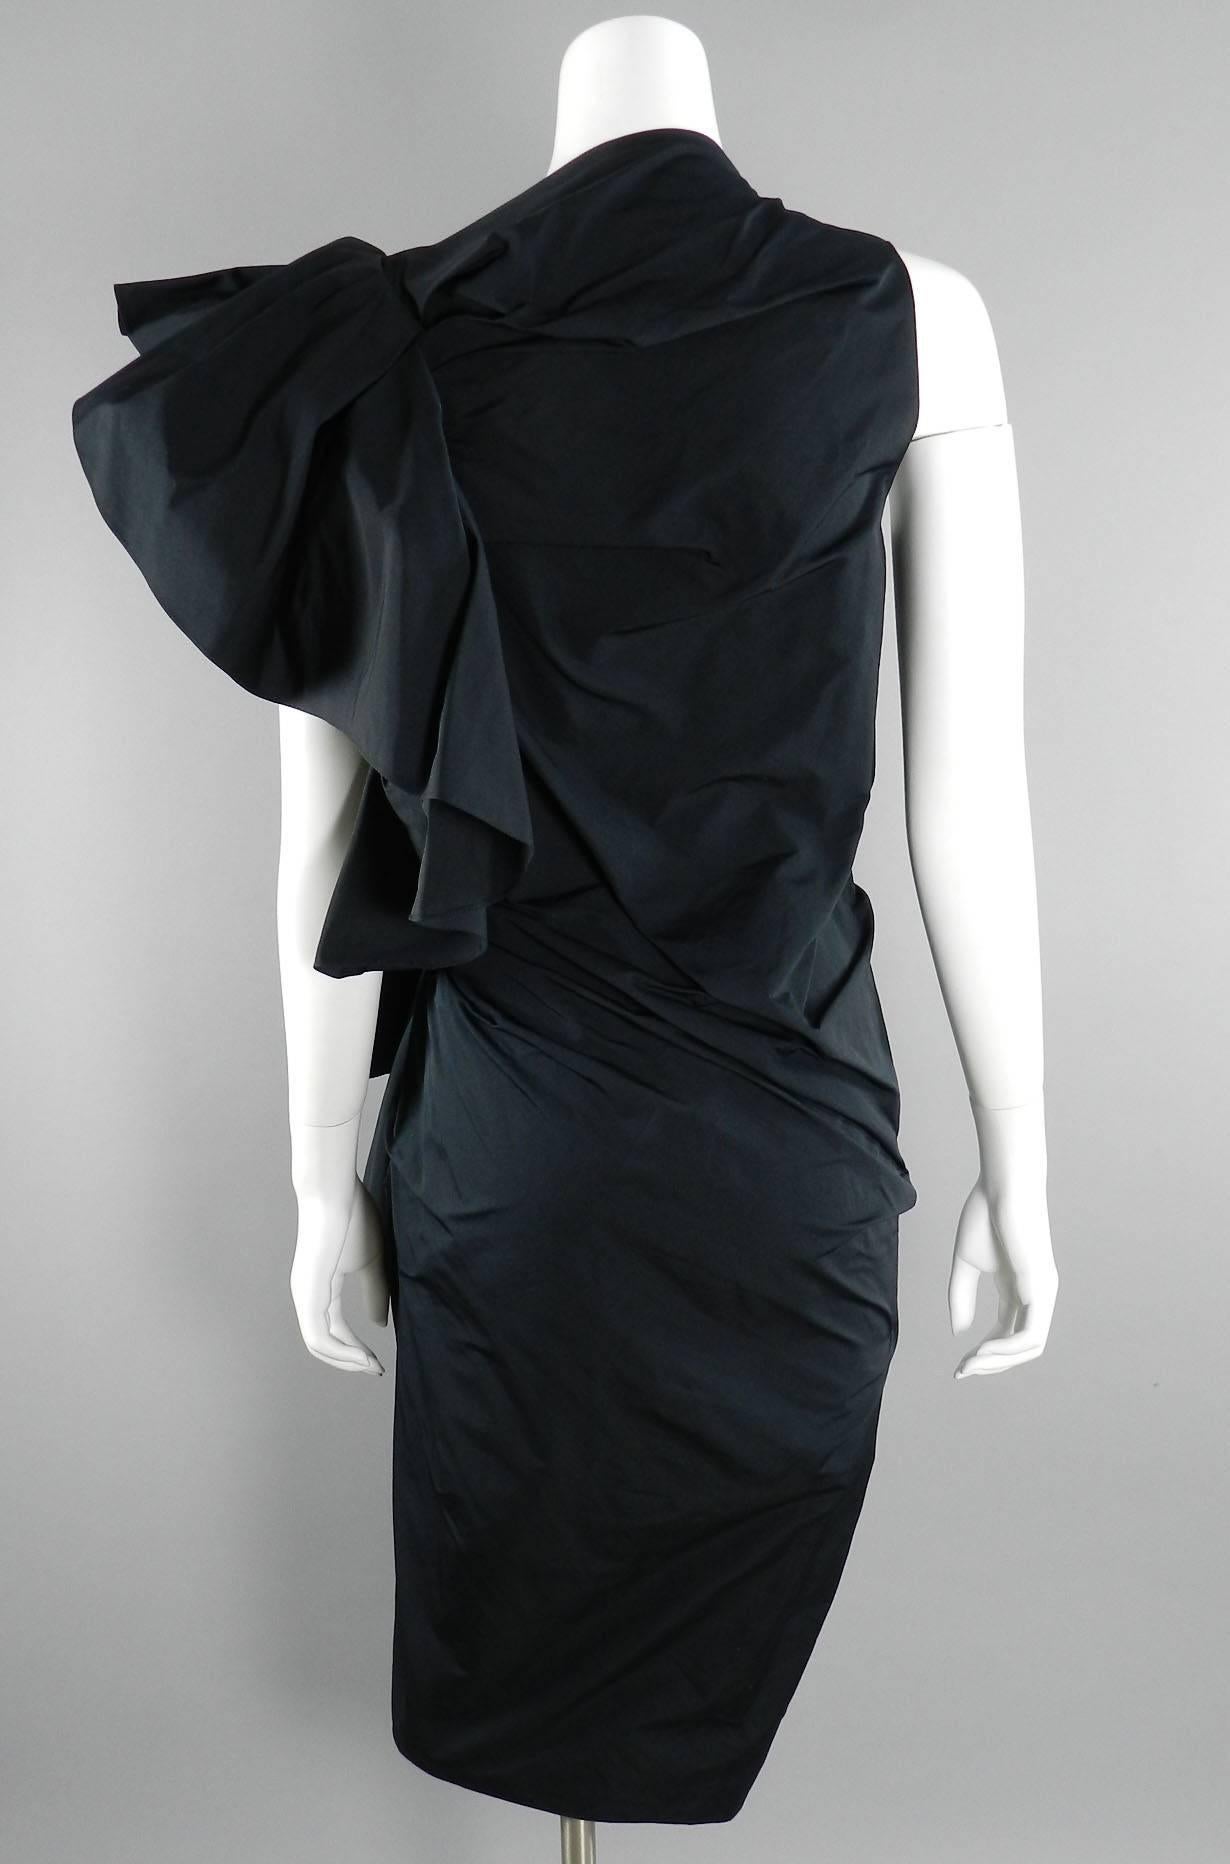 Lanvin black avant garde cocktail dress. 2012 Collection to celebrate 10 years of Alber Elbaz's career as designer at Lanvin. Ruched sheath design with dramatic ruffle detail at left side (shown standing up but can be worn down too). Metal side